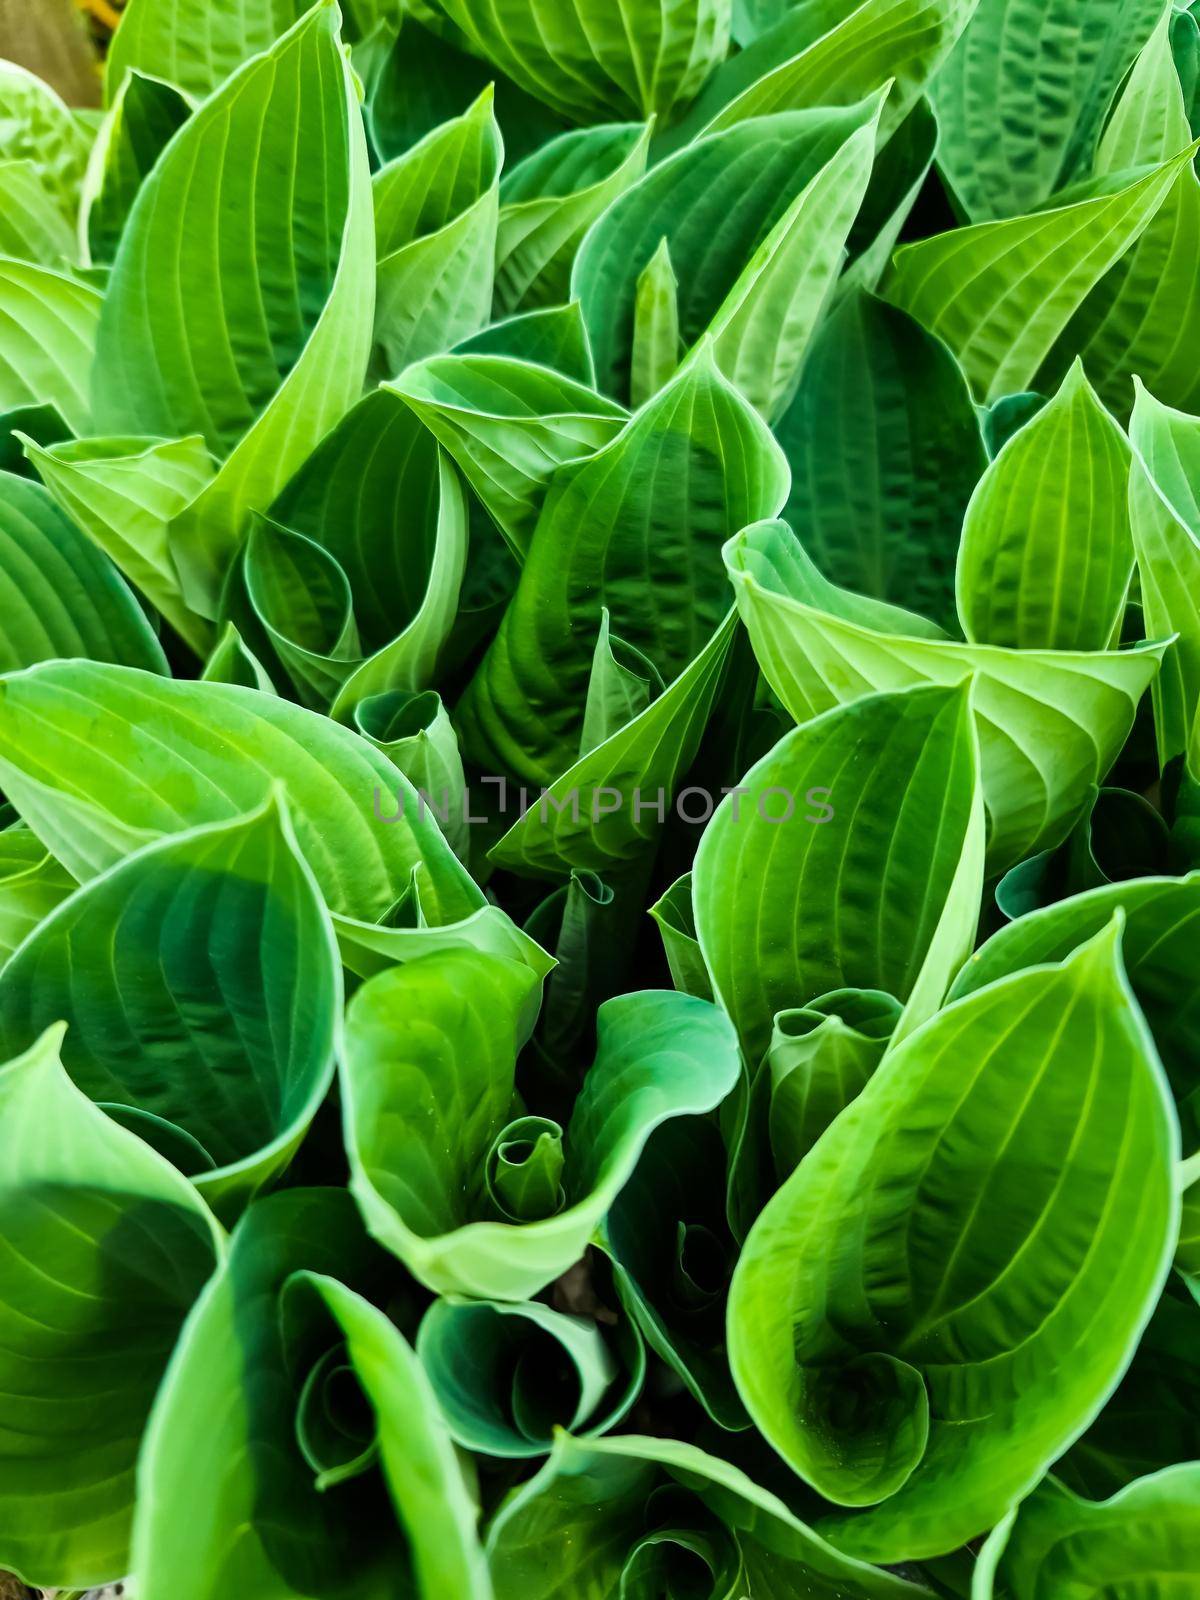 Rolled-in leaves of a funk plant taken from above - botanical background